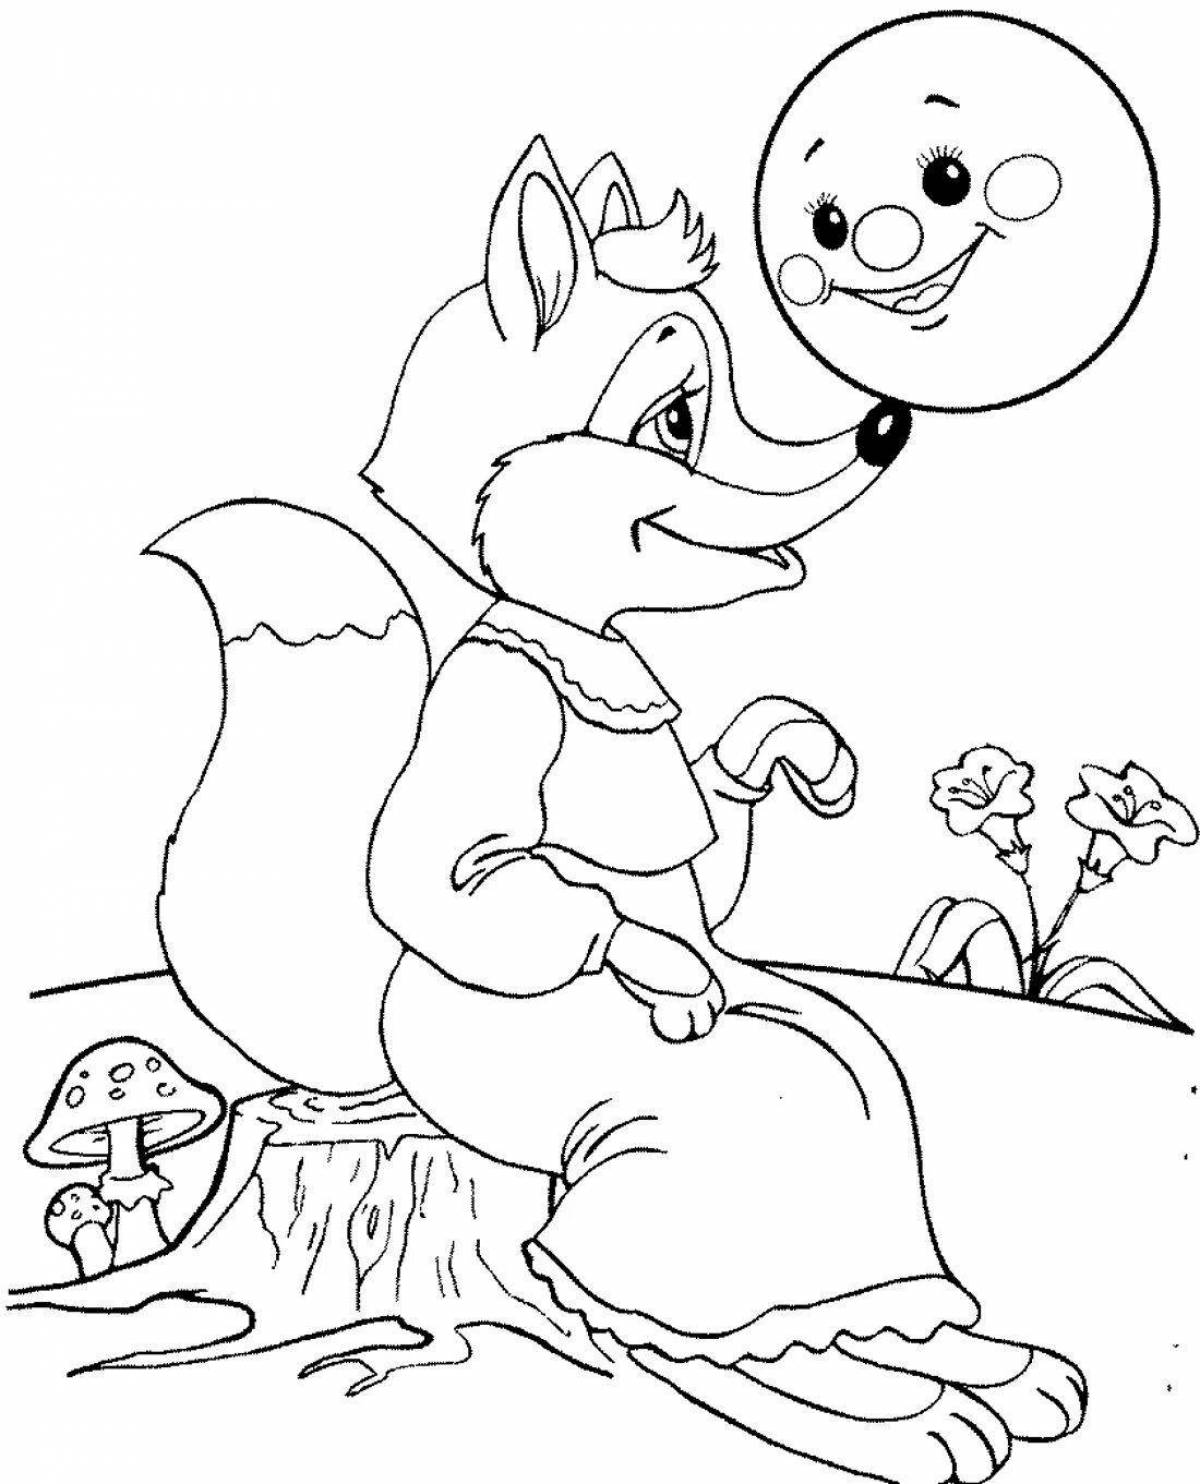 Adorable fox and rabbit coloring book